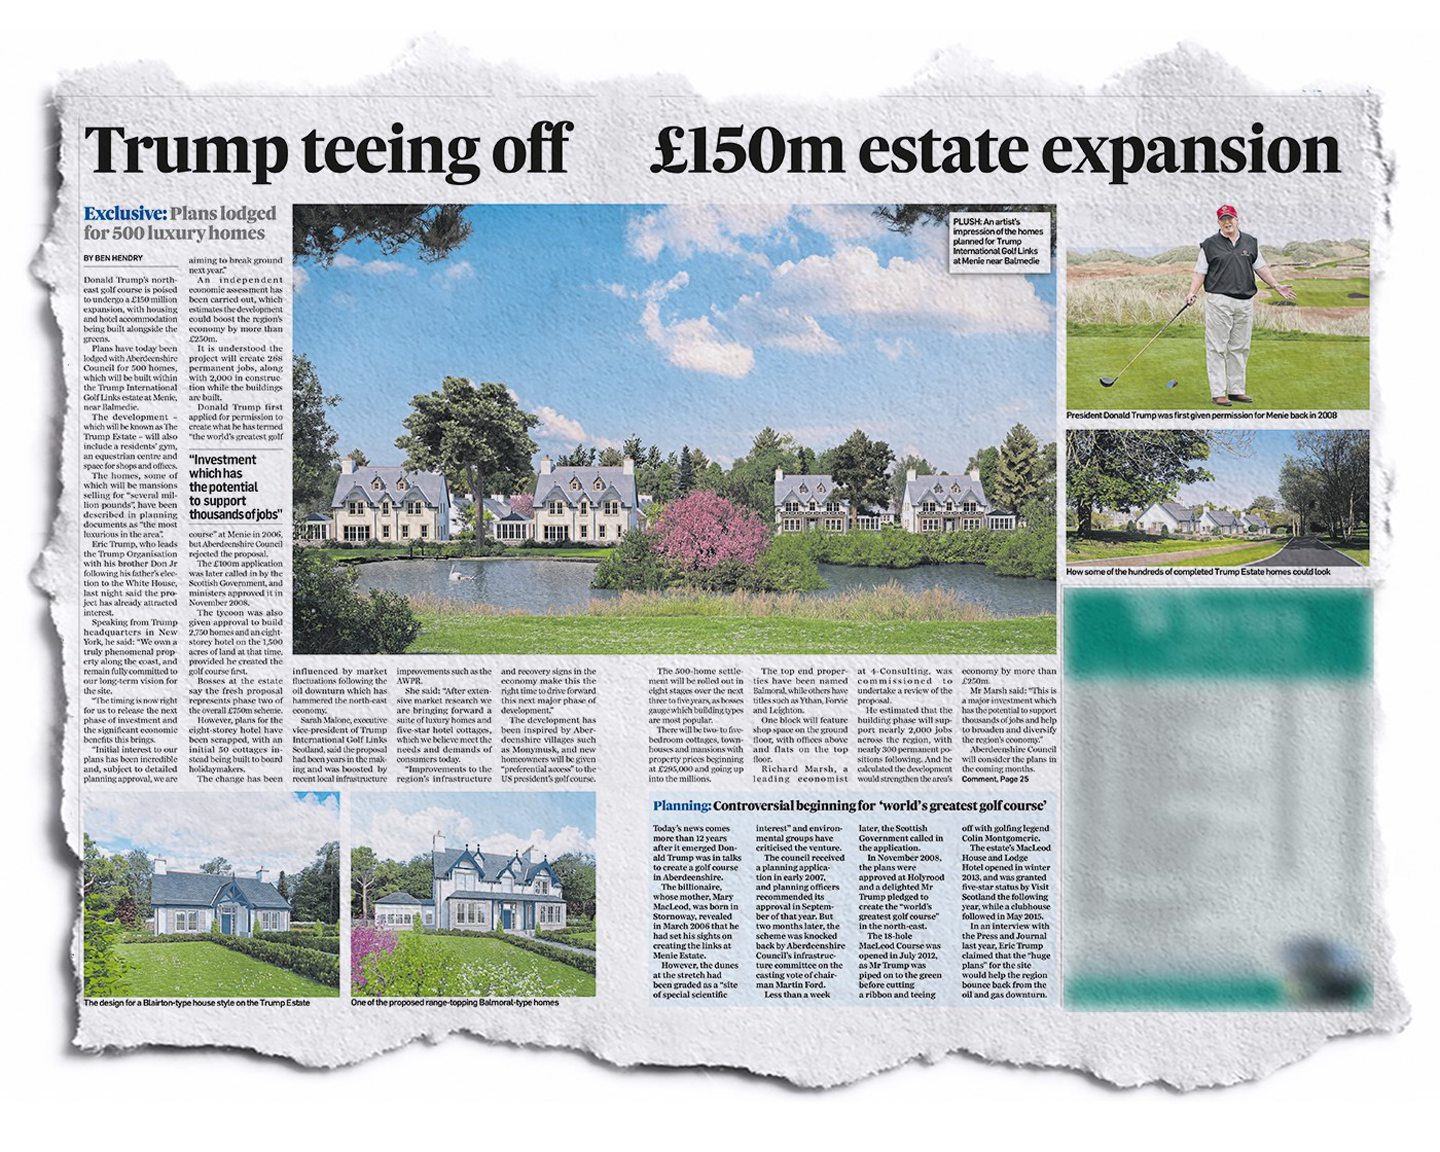 Press and Journal coverage revealing Trump's housing plans at Menie in 2018.